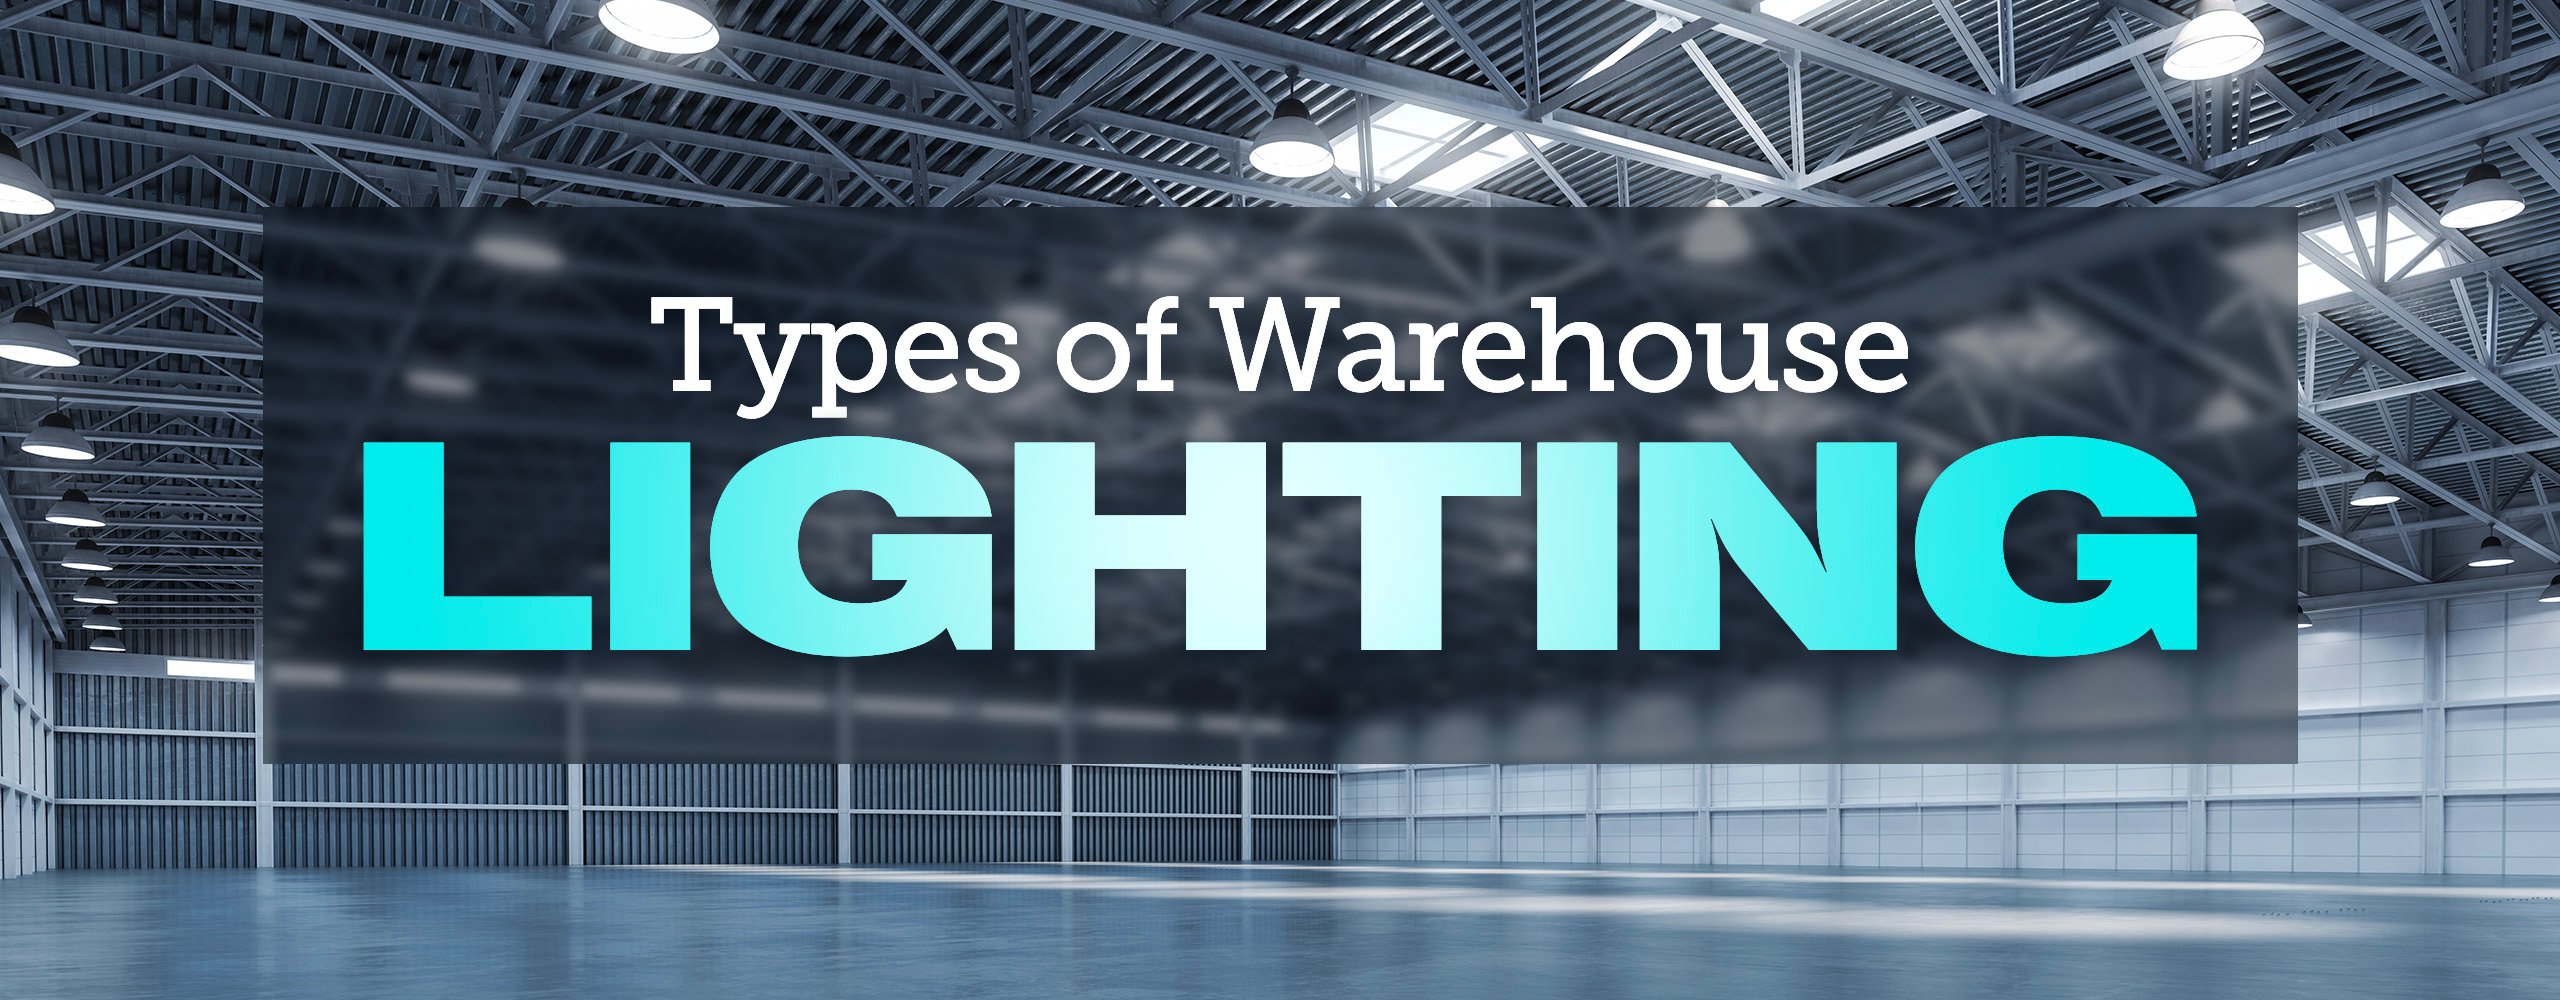 Guide Warehouse & Industrial Lighting Options